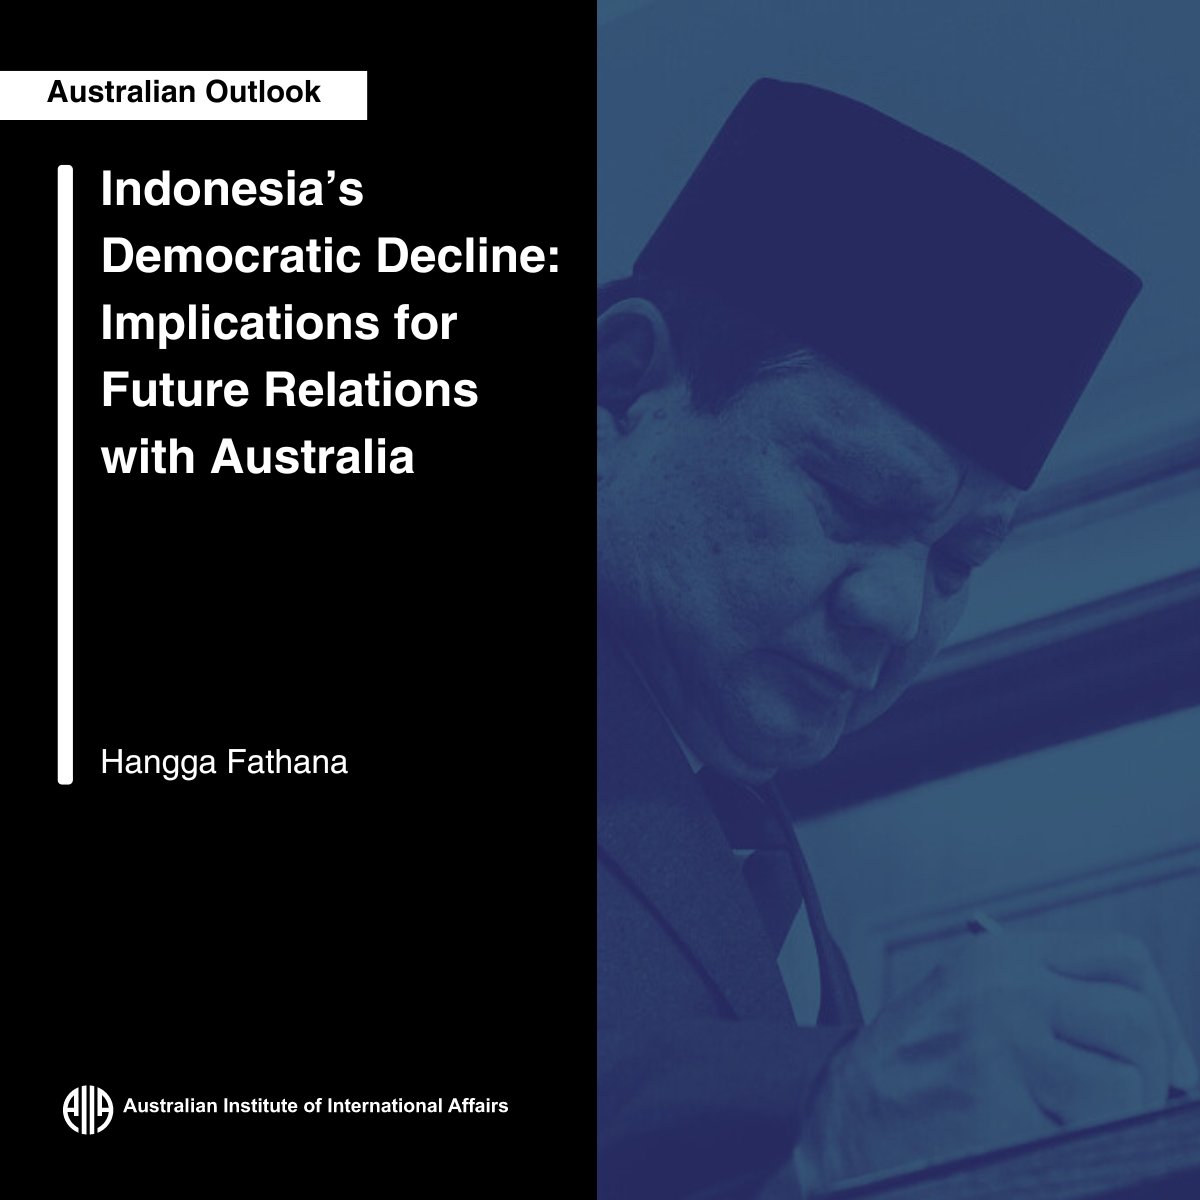 “Uncertainty surrounds Prabowo Subianto’s foreign policy direction..., noting his history of shifting stances from ultra-nationalism to projecting a good neighbour image,” discussed by Hangga Fathana Read more at Australian Outlook👇 ow.ly/ewO950RhMx3